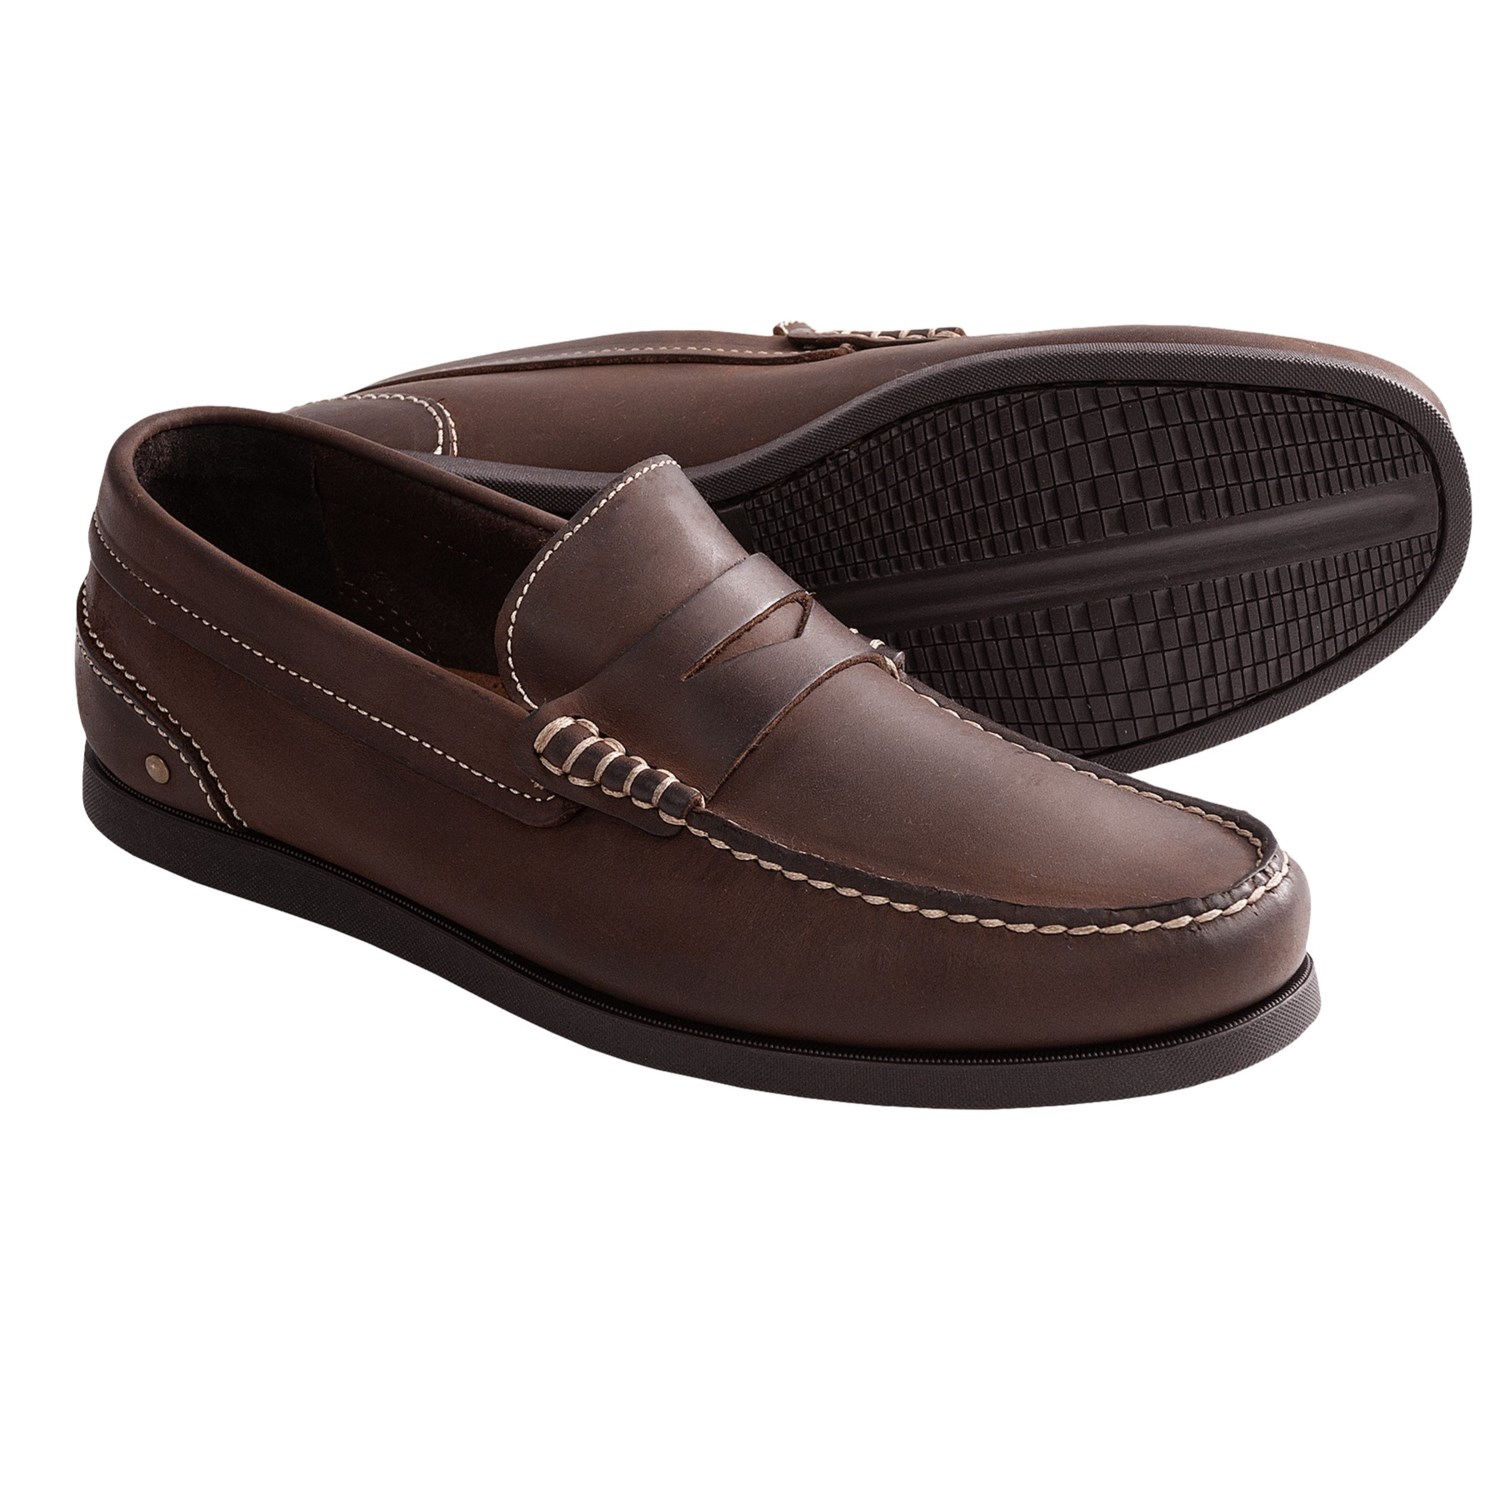 johnston-and-murphy-barnaby-penny-loafer-shoes-nubuck-for-men-in-dark ...